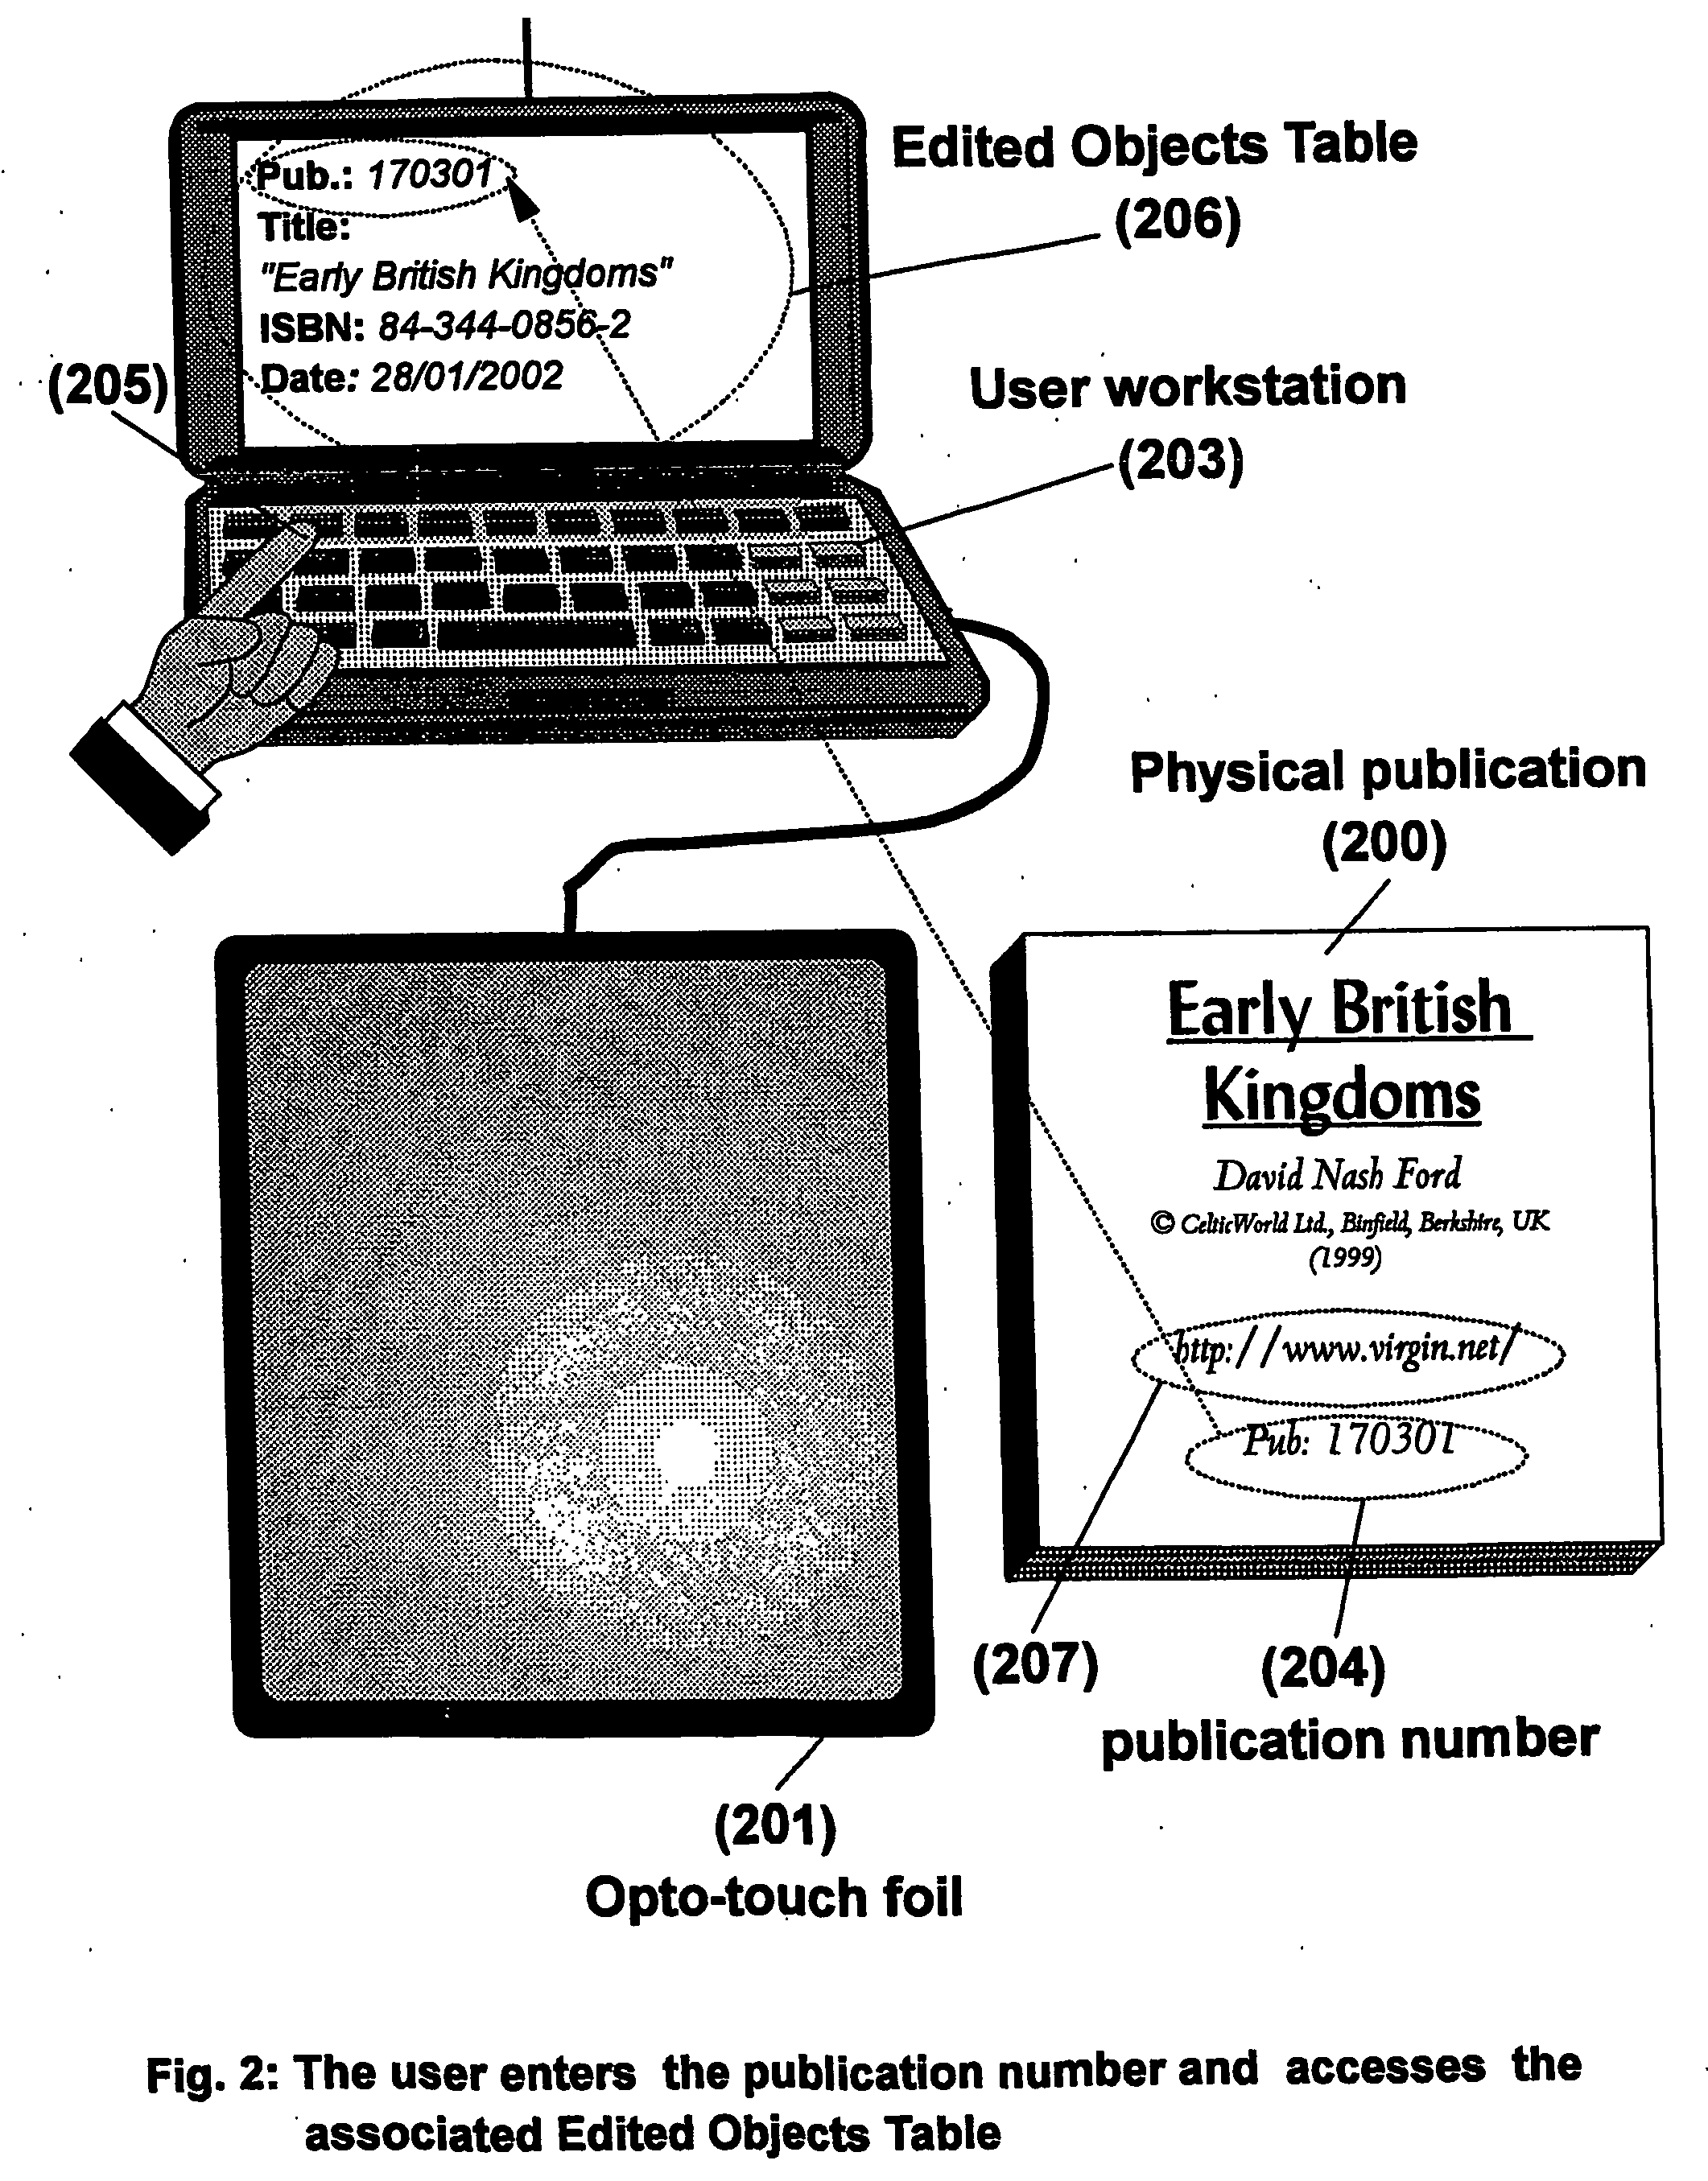 System and method for selecting, ordering and accessing copyrighted information from physical documents